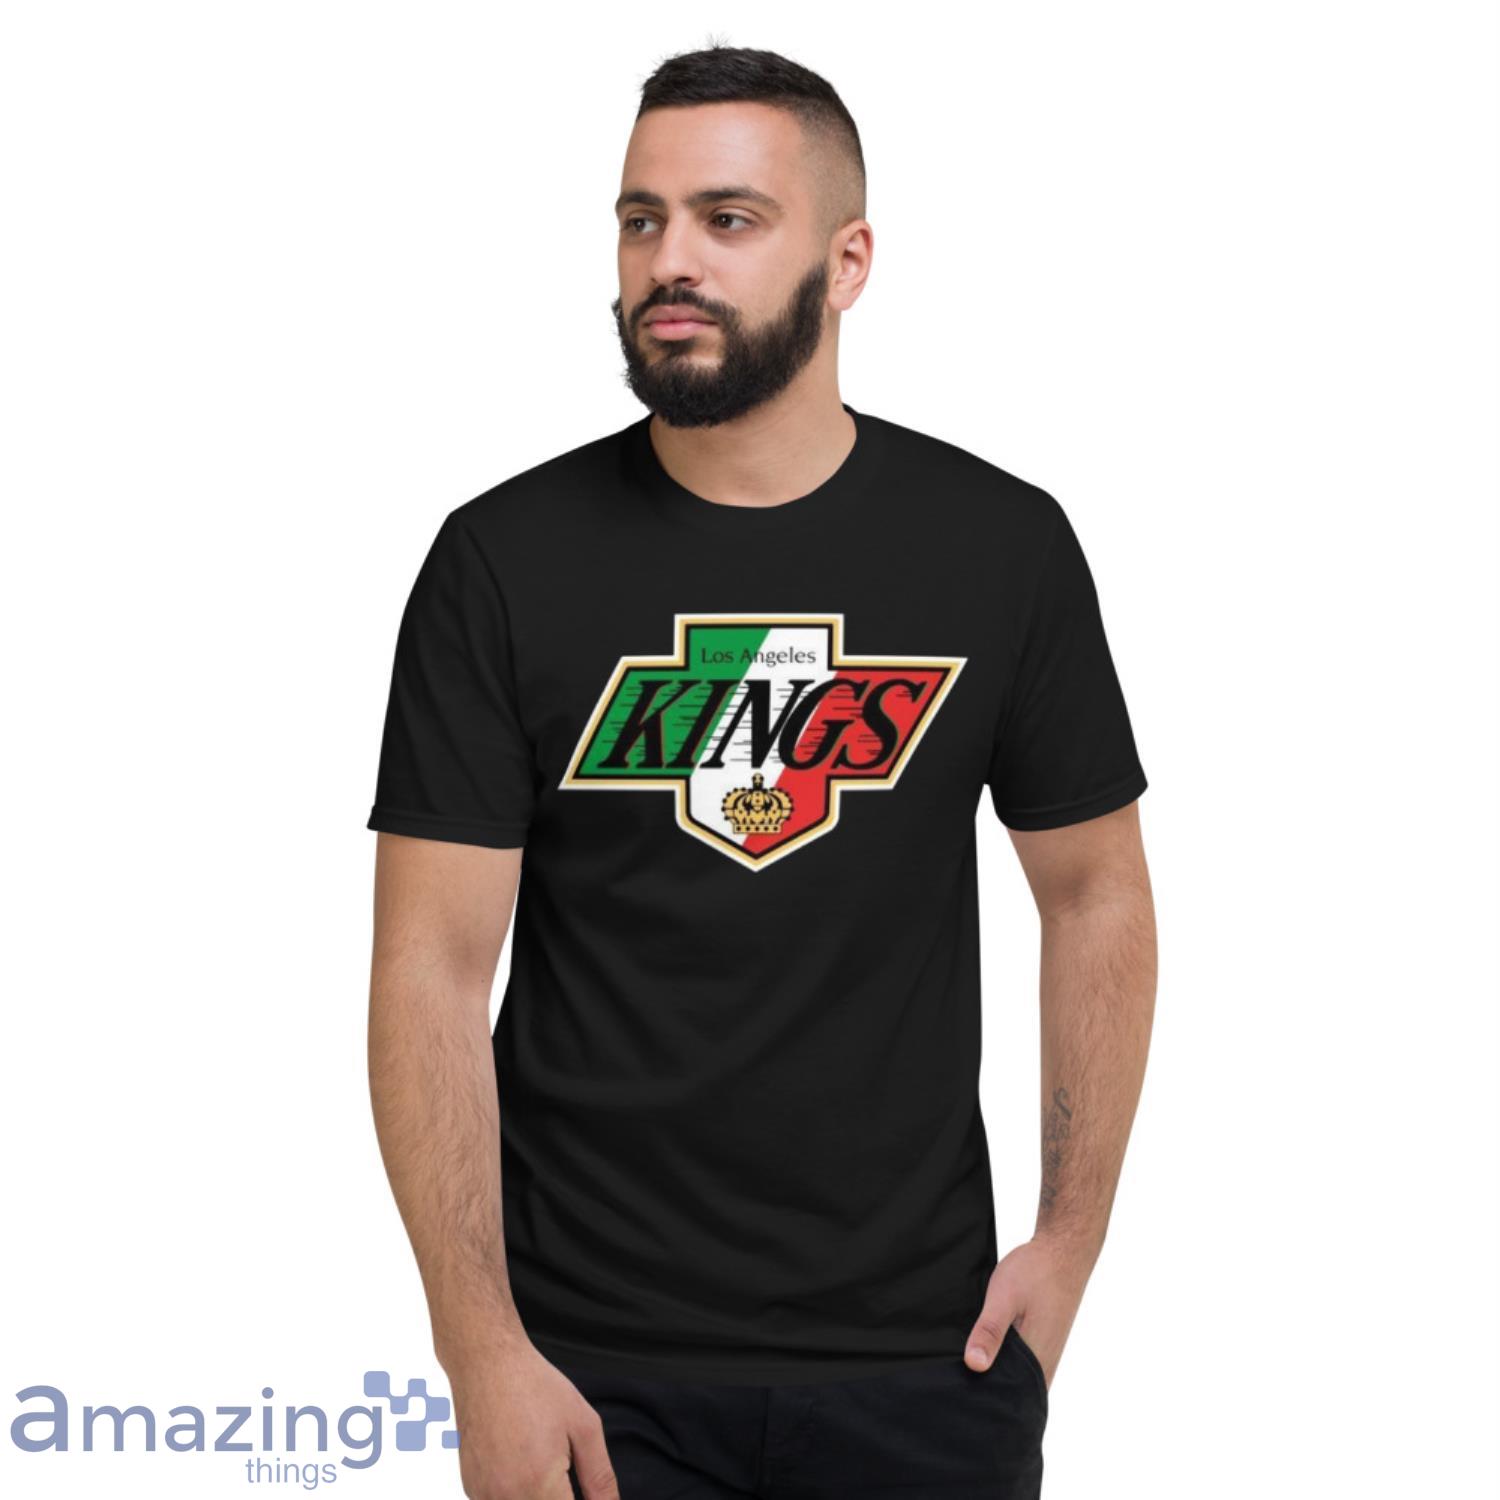 Los Angeles Kings X Vg Mexican Heritage Night T-shirt,Sweater